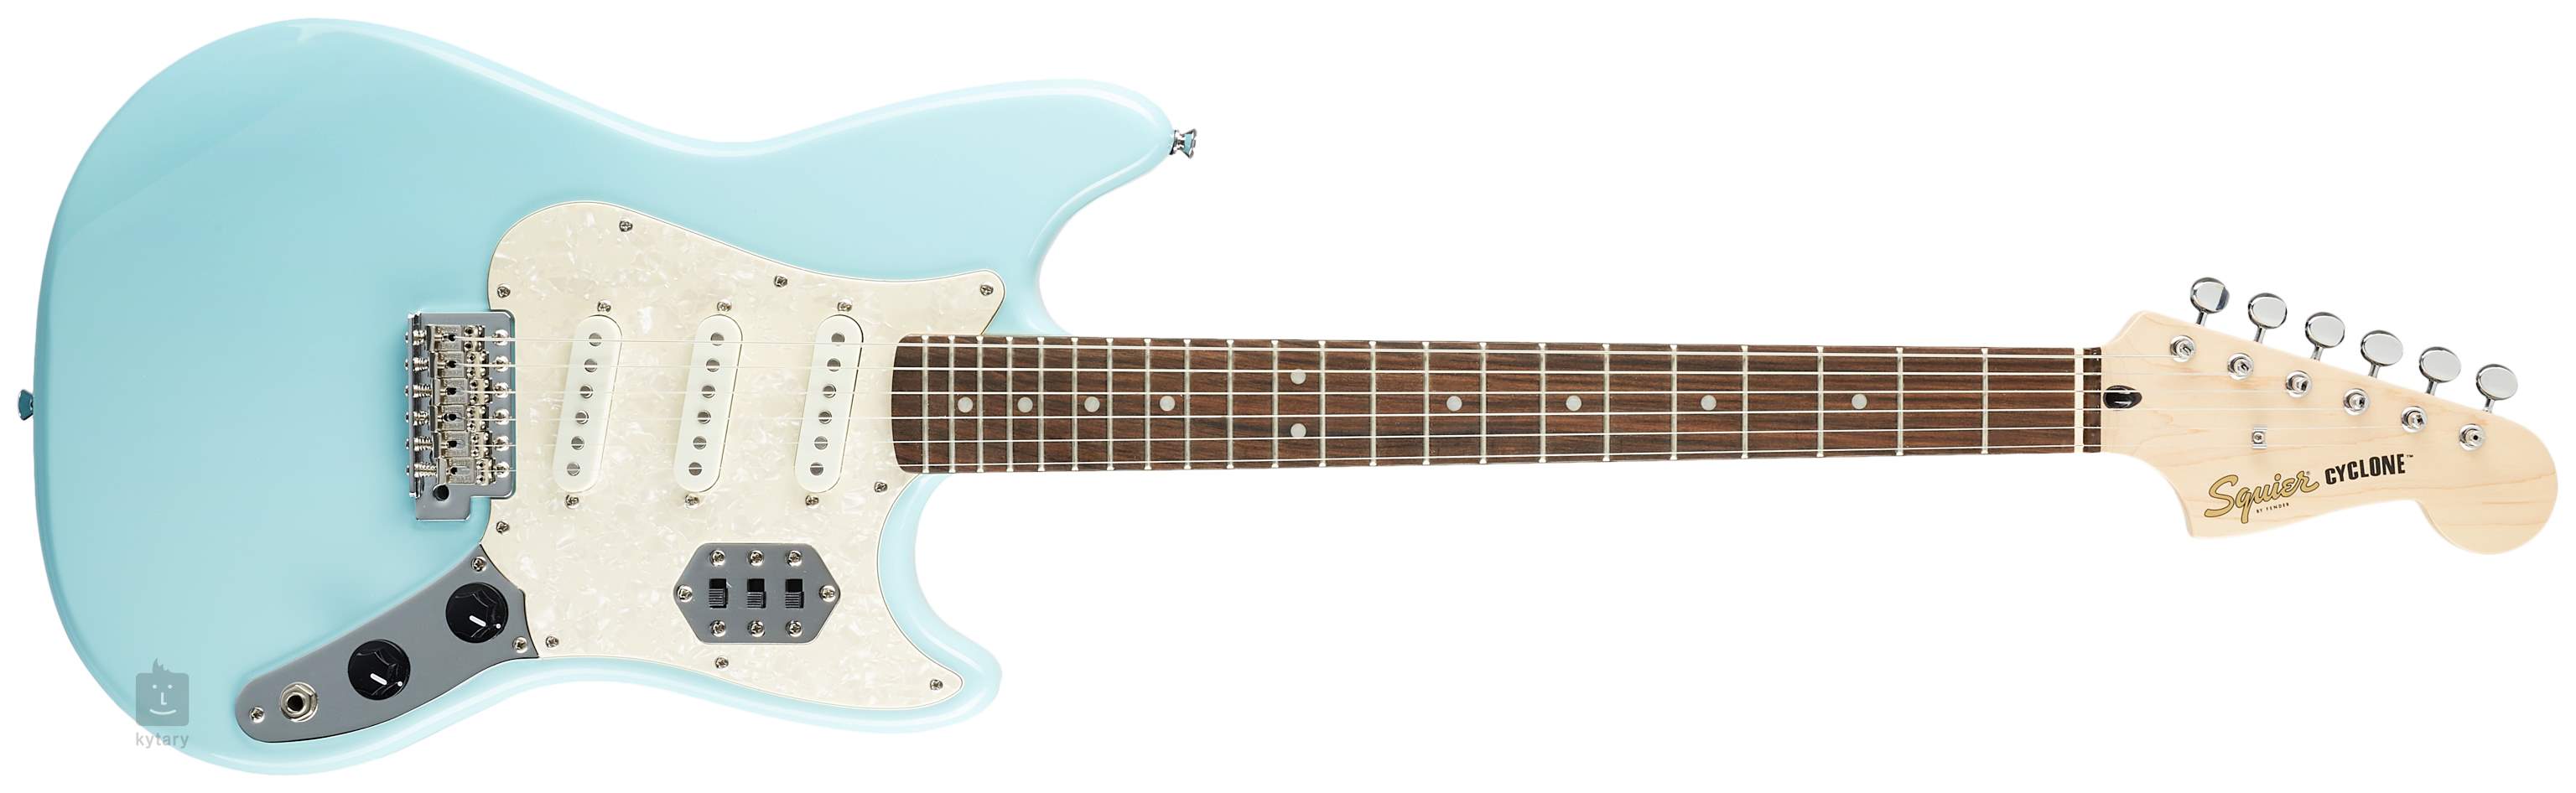 Squier CYCLONE スクワイヤー サイクロン ギター エレキギター ...